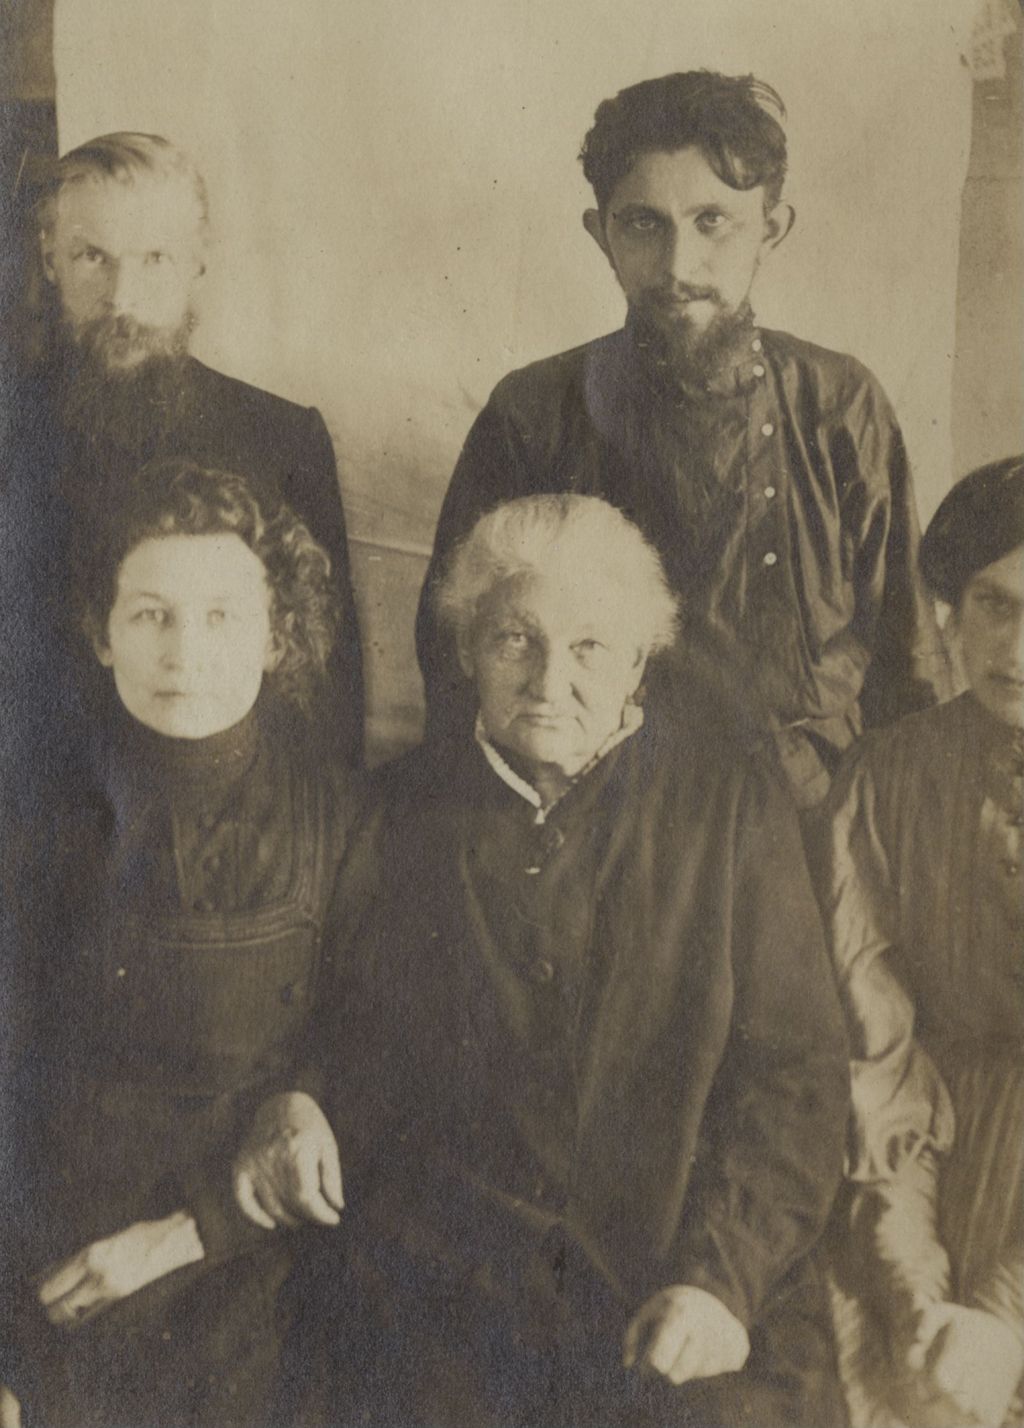 Miniature of Russian revolutionary Catherine Breshovsky and four others